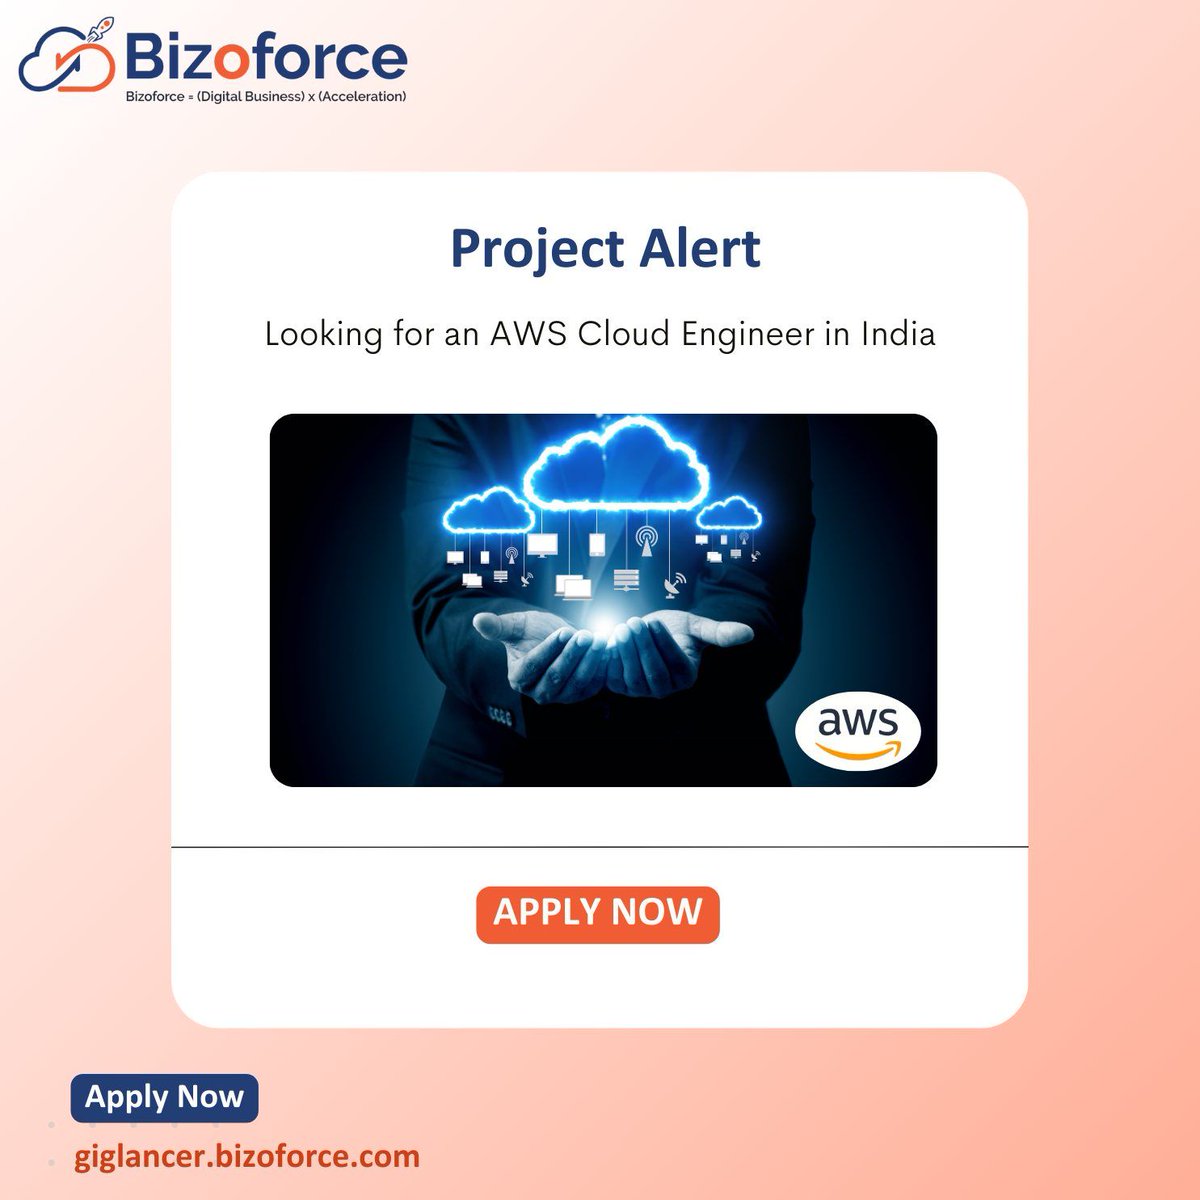 🌟 Exciting Opportunity Alert! 🌟 Are you a skilled AWS Cloud Engineer based in India? Apply now on Giglancer for a chance to shape the future of cloud technology. #AWS #CloudEngineer #TechJobs #IndiaOpportunity

Apply Now - buff.ly/3U47Xp4